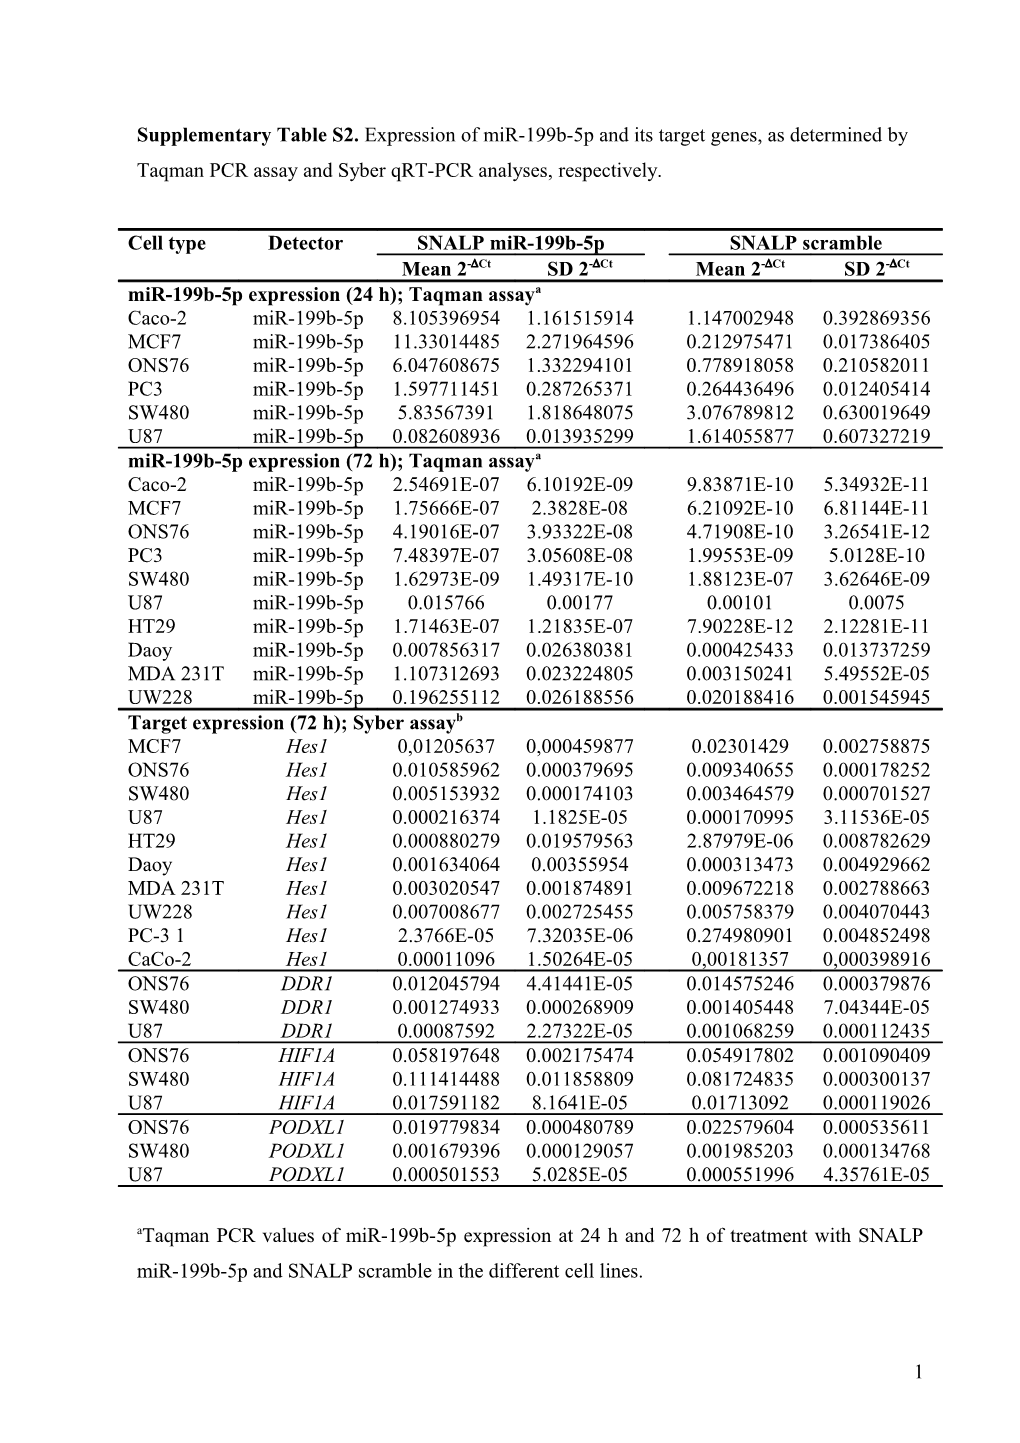 Supplementary Table S2. Expression of Mir-199B-5P and Its Target Genes, As Determined